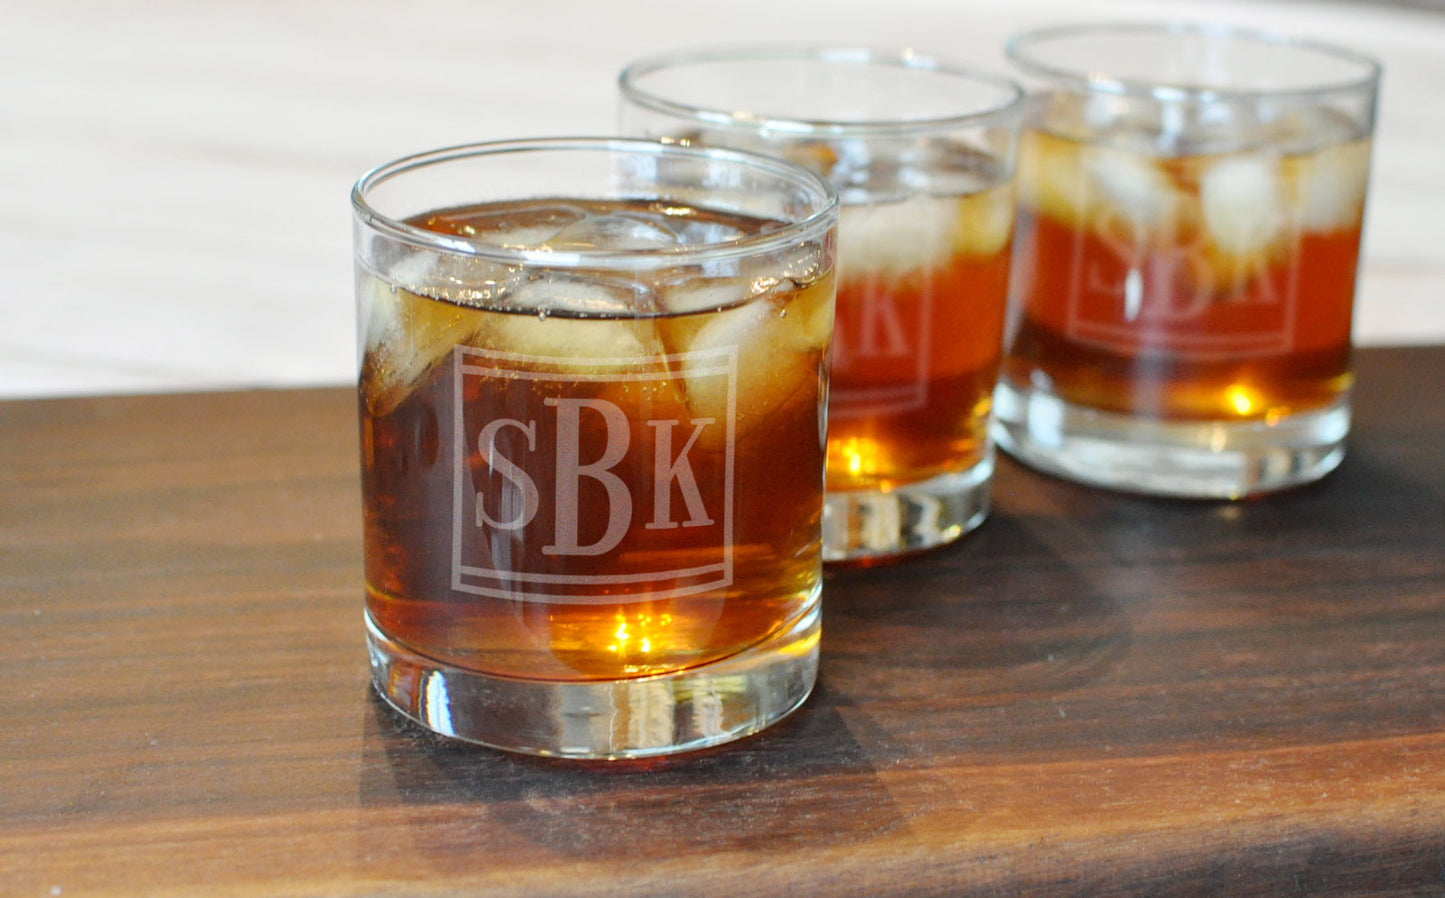 Monogram Engraved Rocks Glasses | Gifts for Him - Intricut Creations